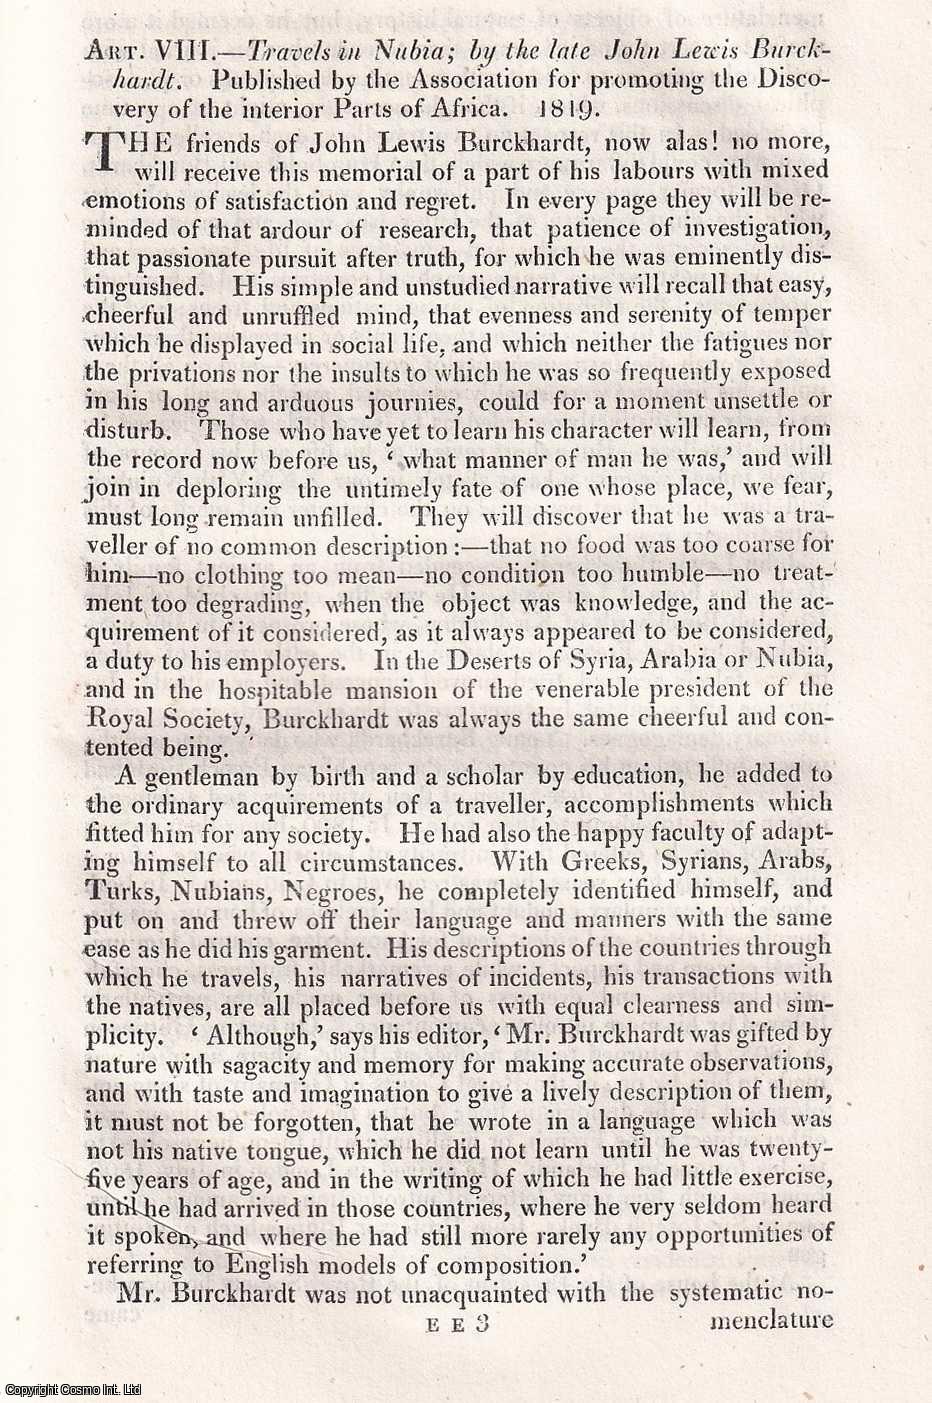 John Barrow - Burckhardt's Travels in Nubia. An uncommon original article from The Quarterly Review, 1820.